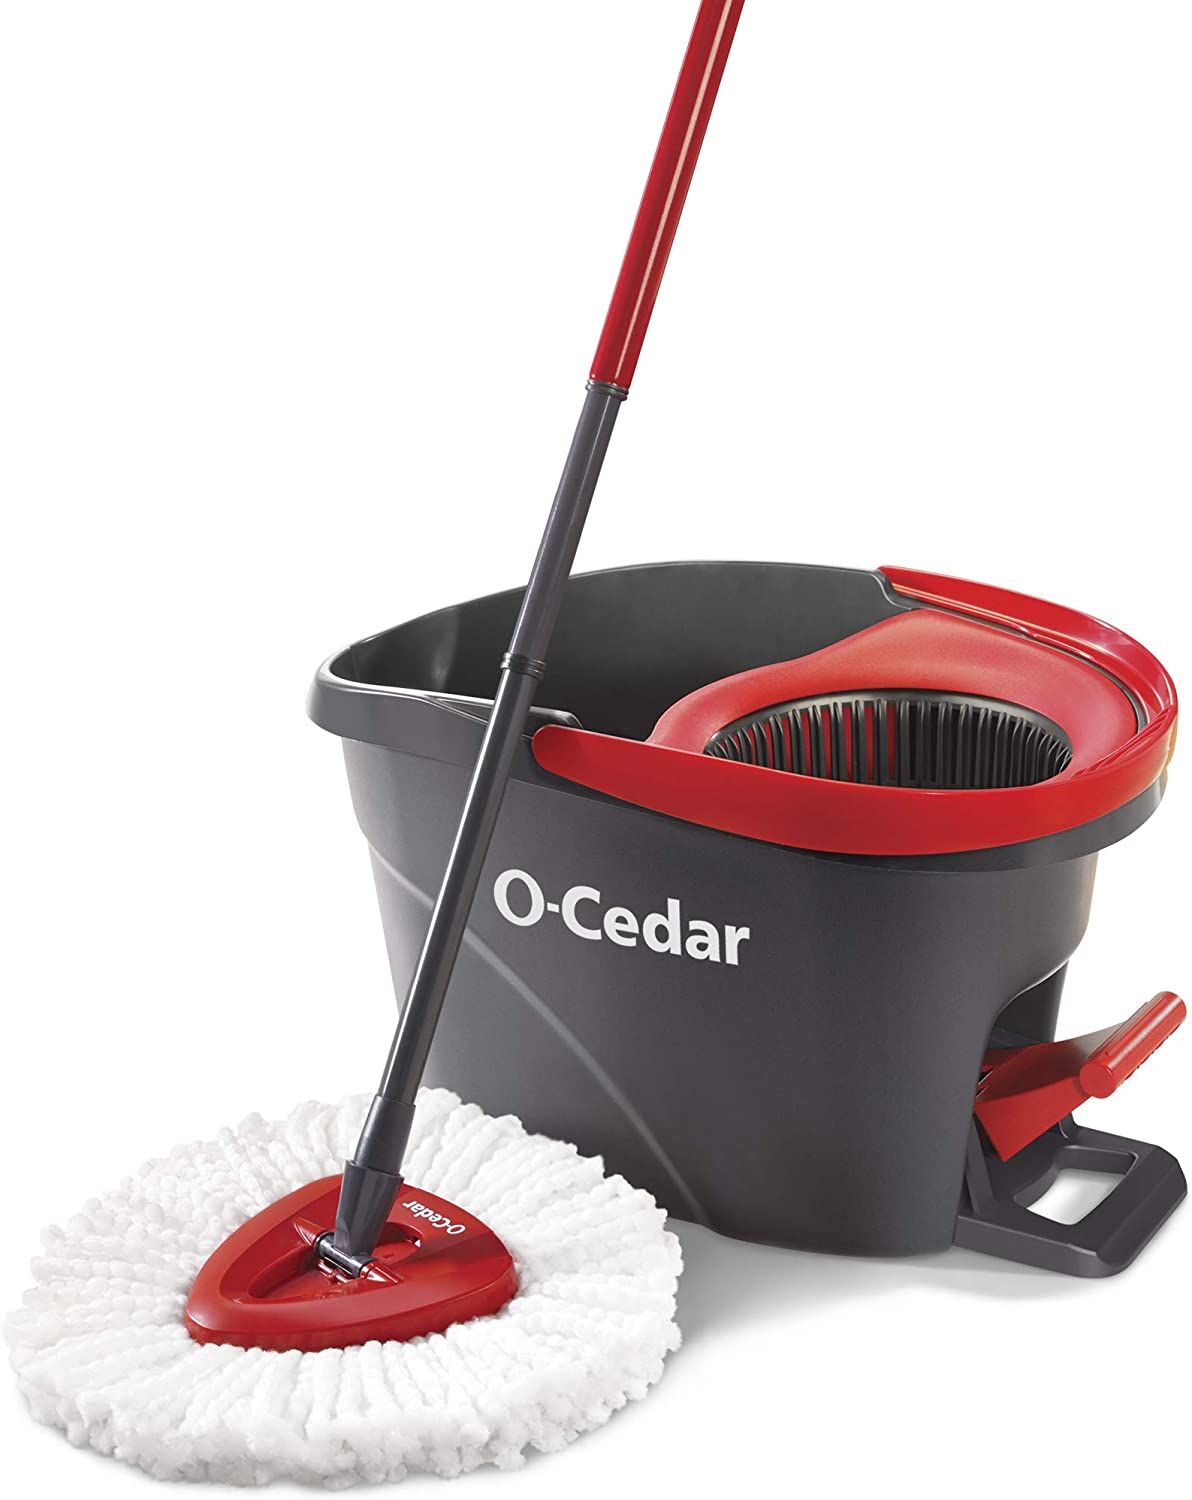 O-Cedar EasyWring Microfiber Spin Mop, Bucket Floor Cleaning System, Red, Gray | Amazon (US)